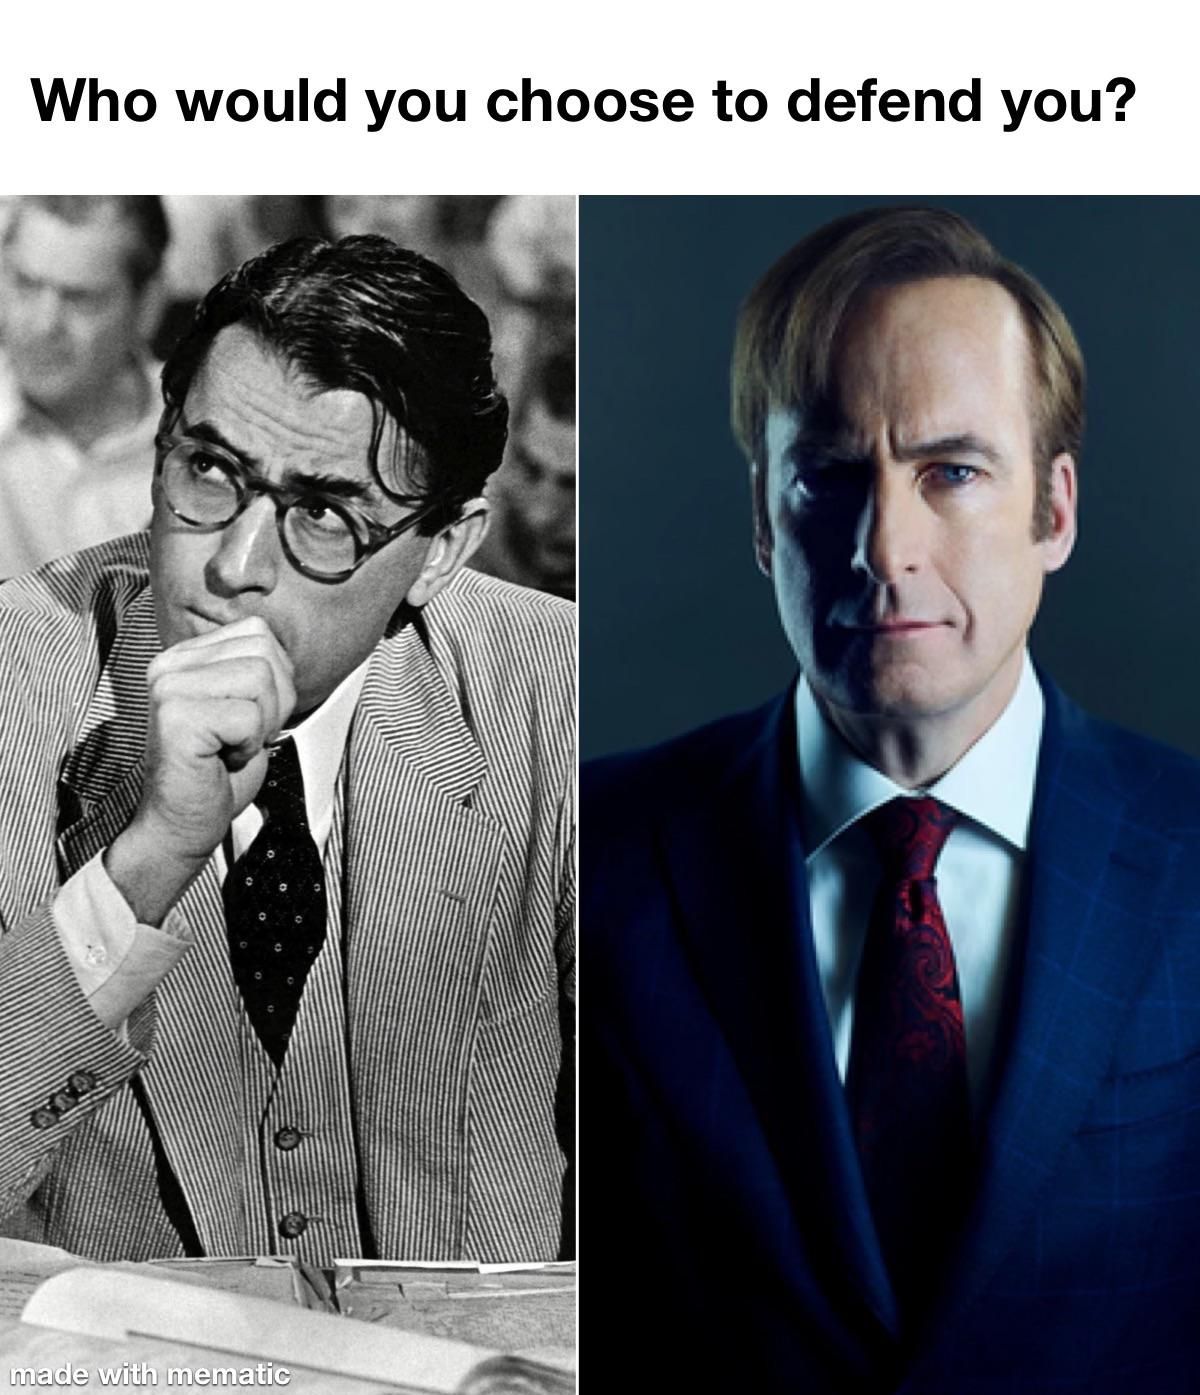 Atticus Finch or Saul Goodman? Who would you trust?